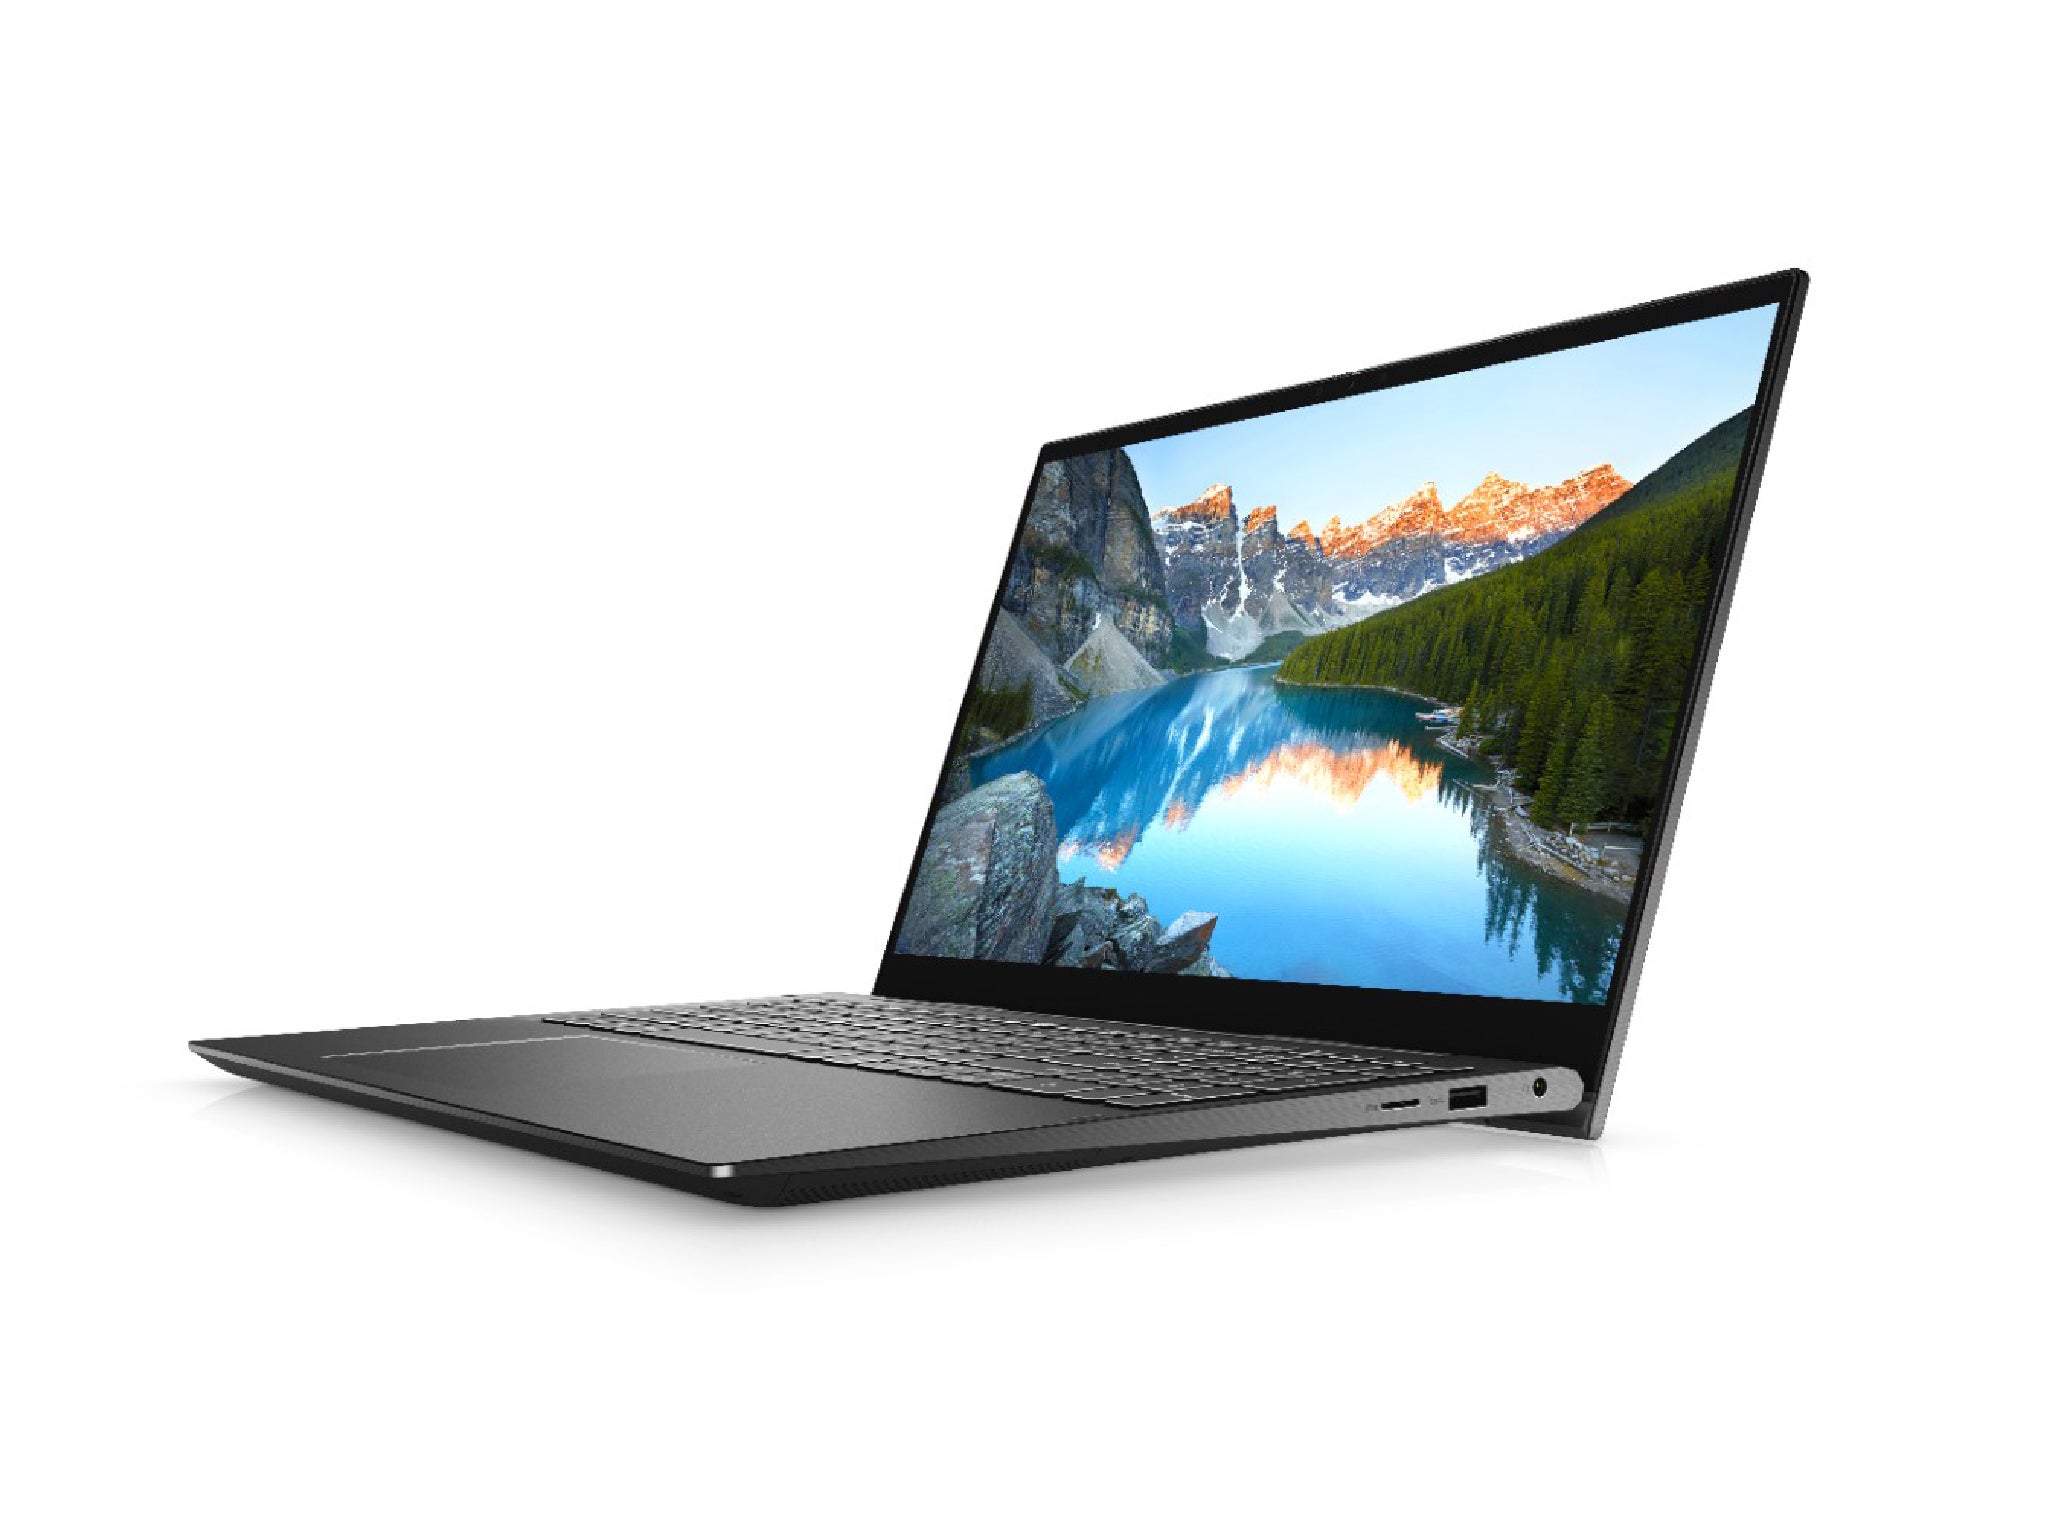 The Dell Inspiron 15 2-in-1 in black starts at £1,129